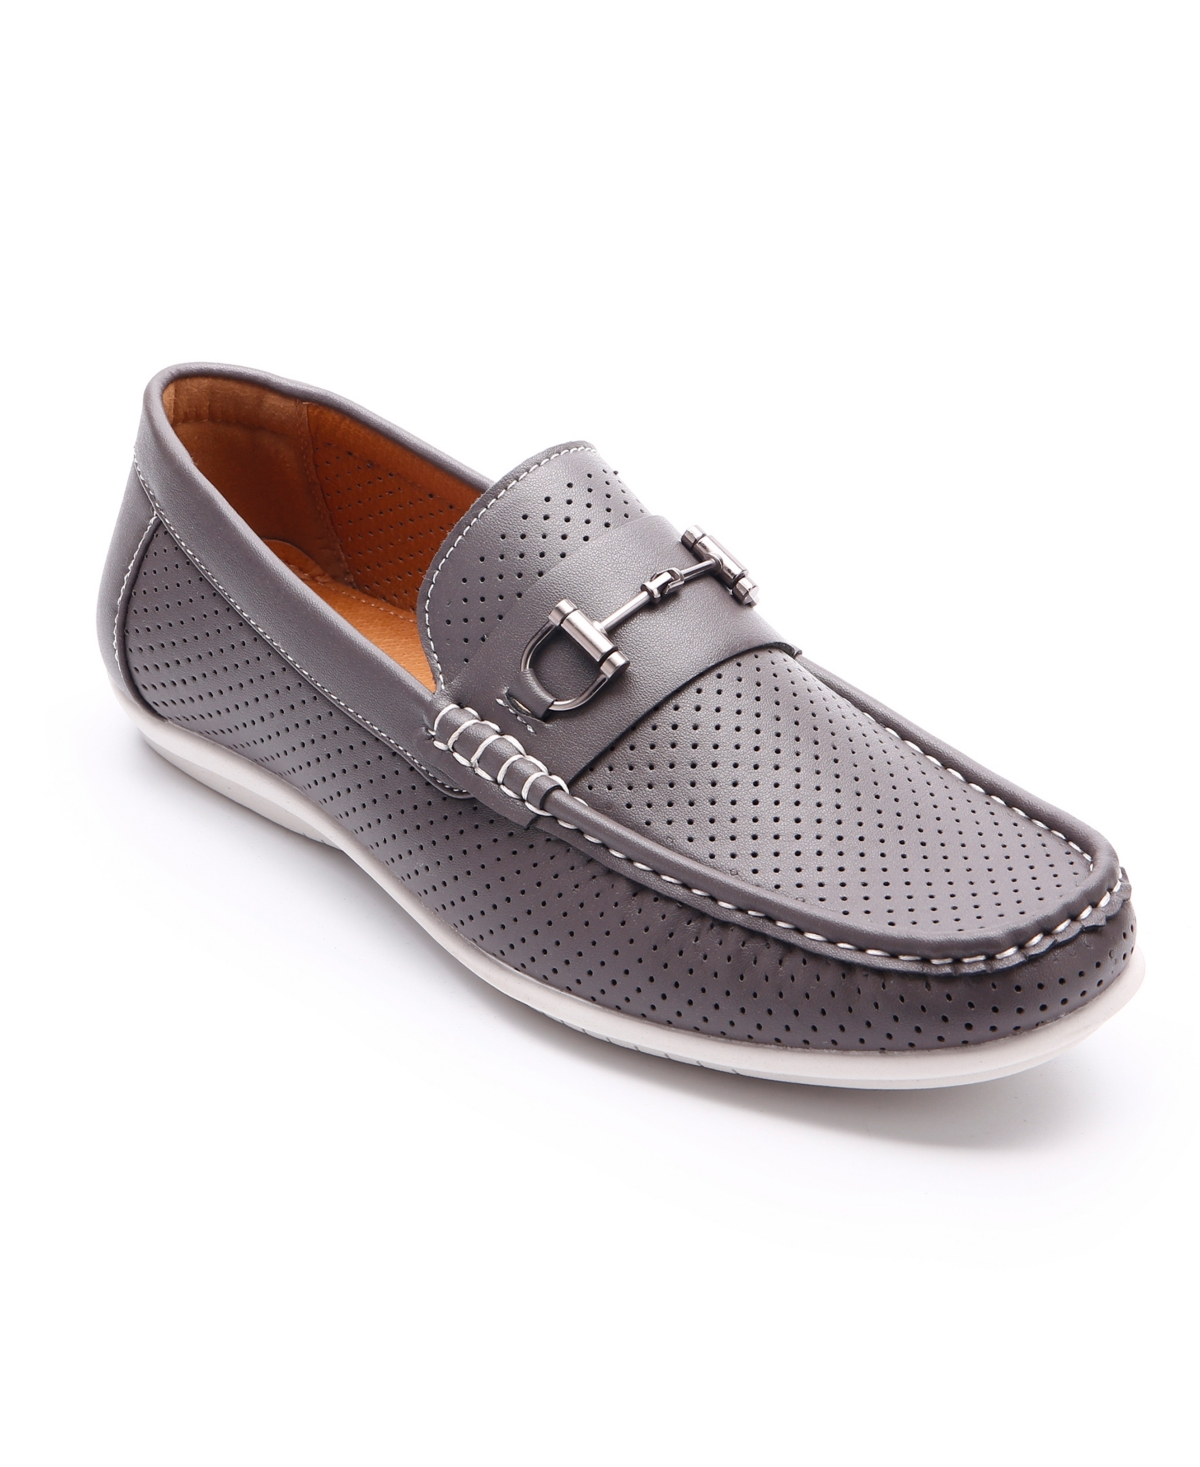 Men's Perforated Classic Driving Shoes - White